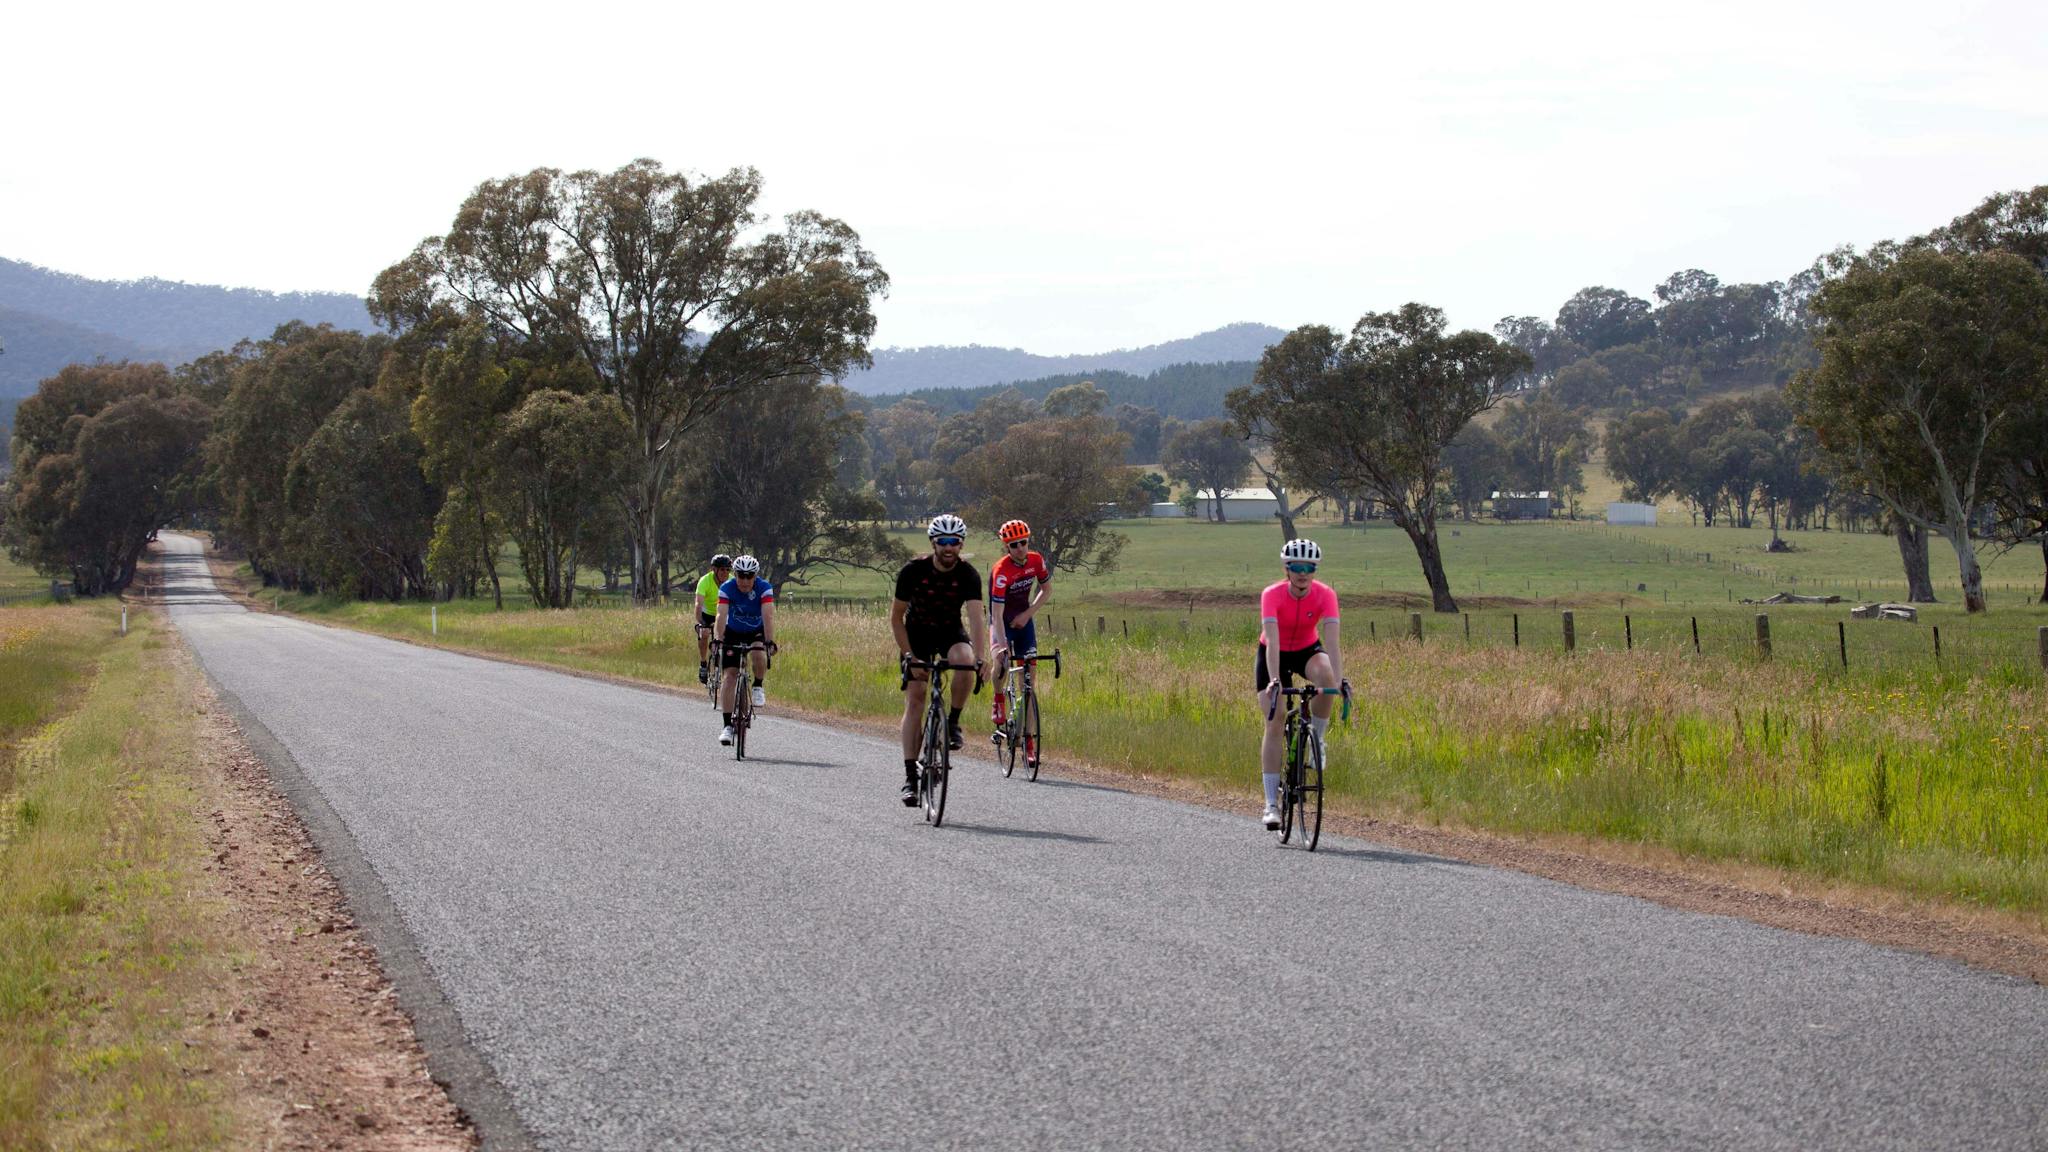 cyclists on road farming country side gum trees mountains sheds